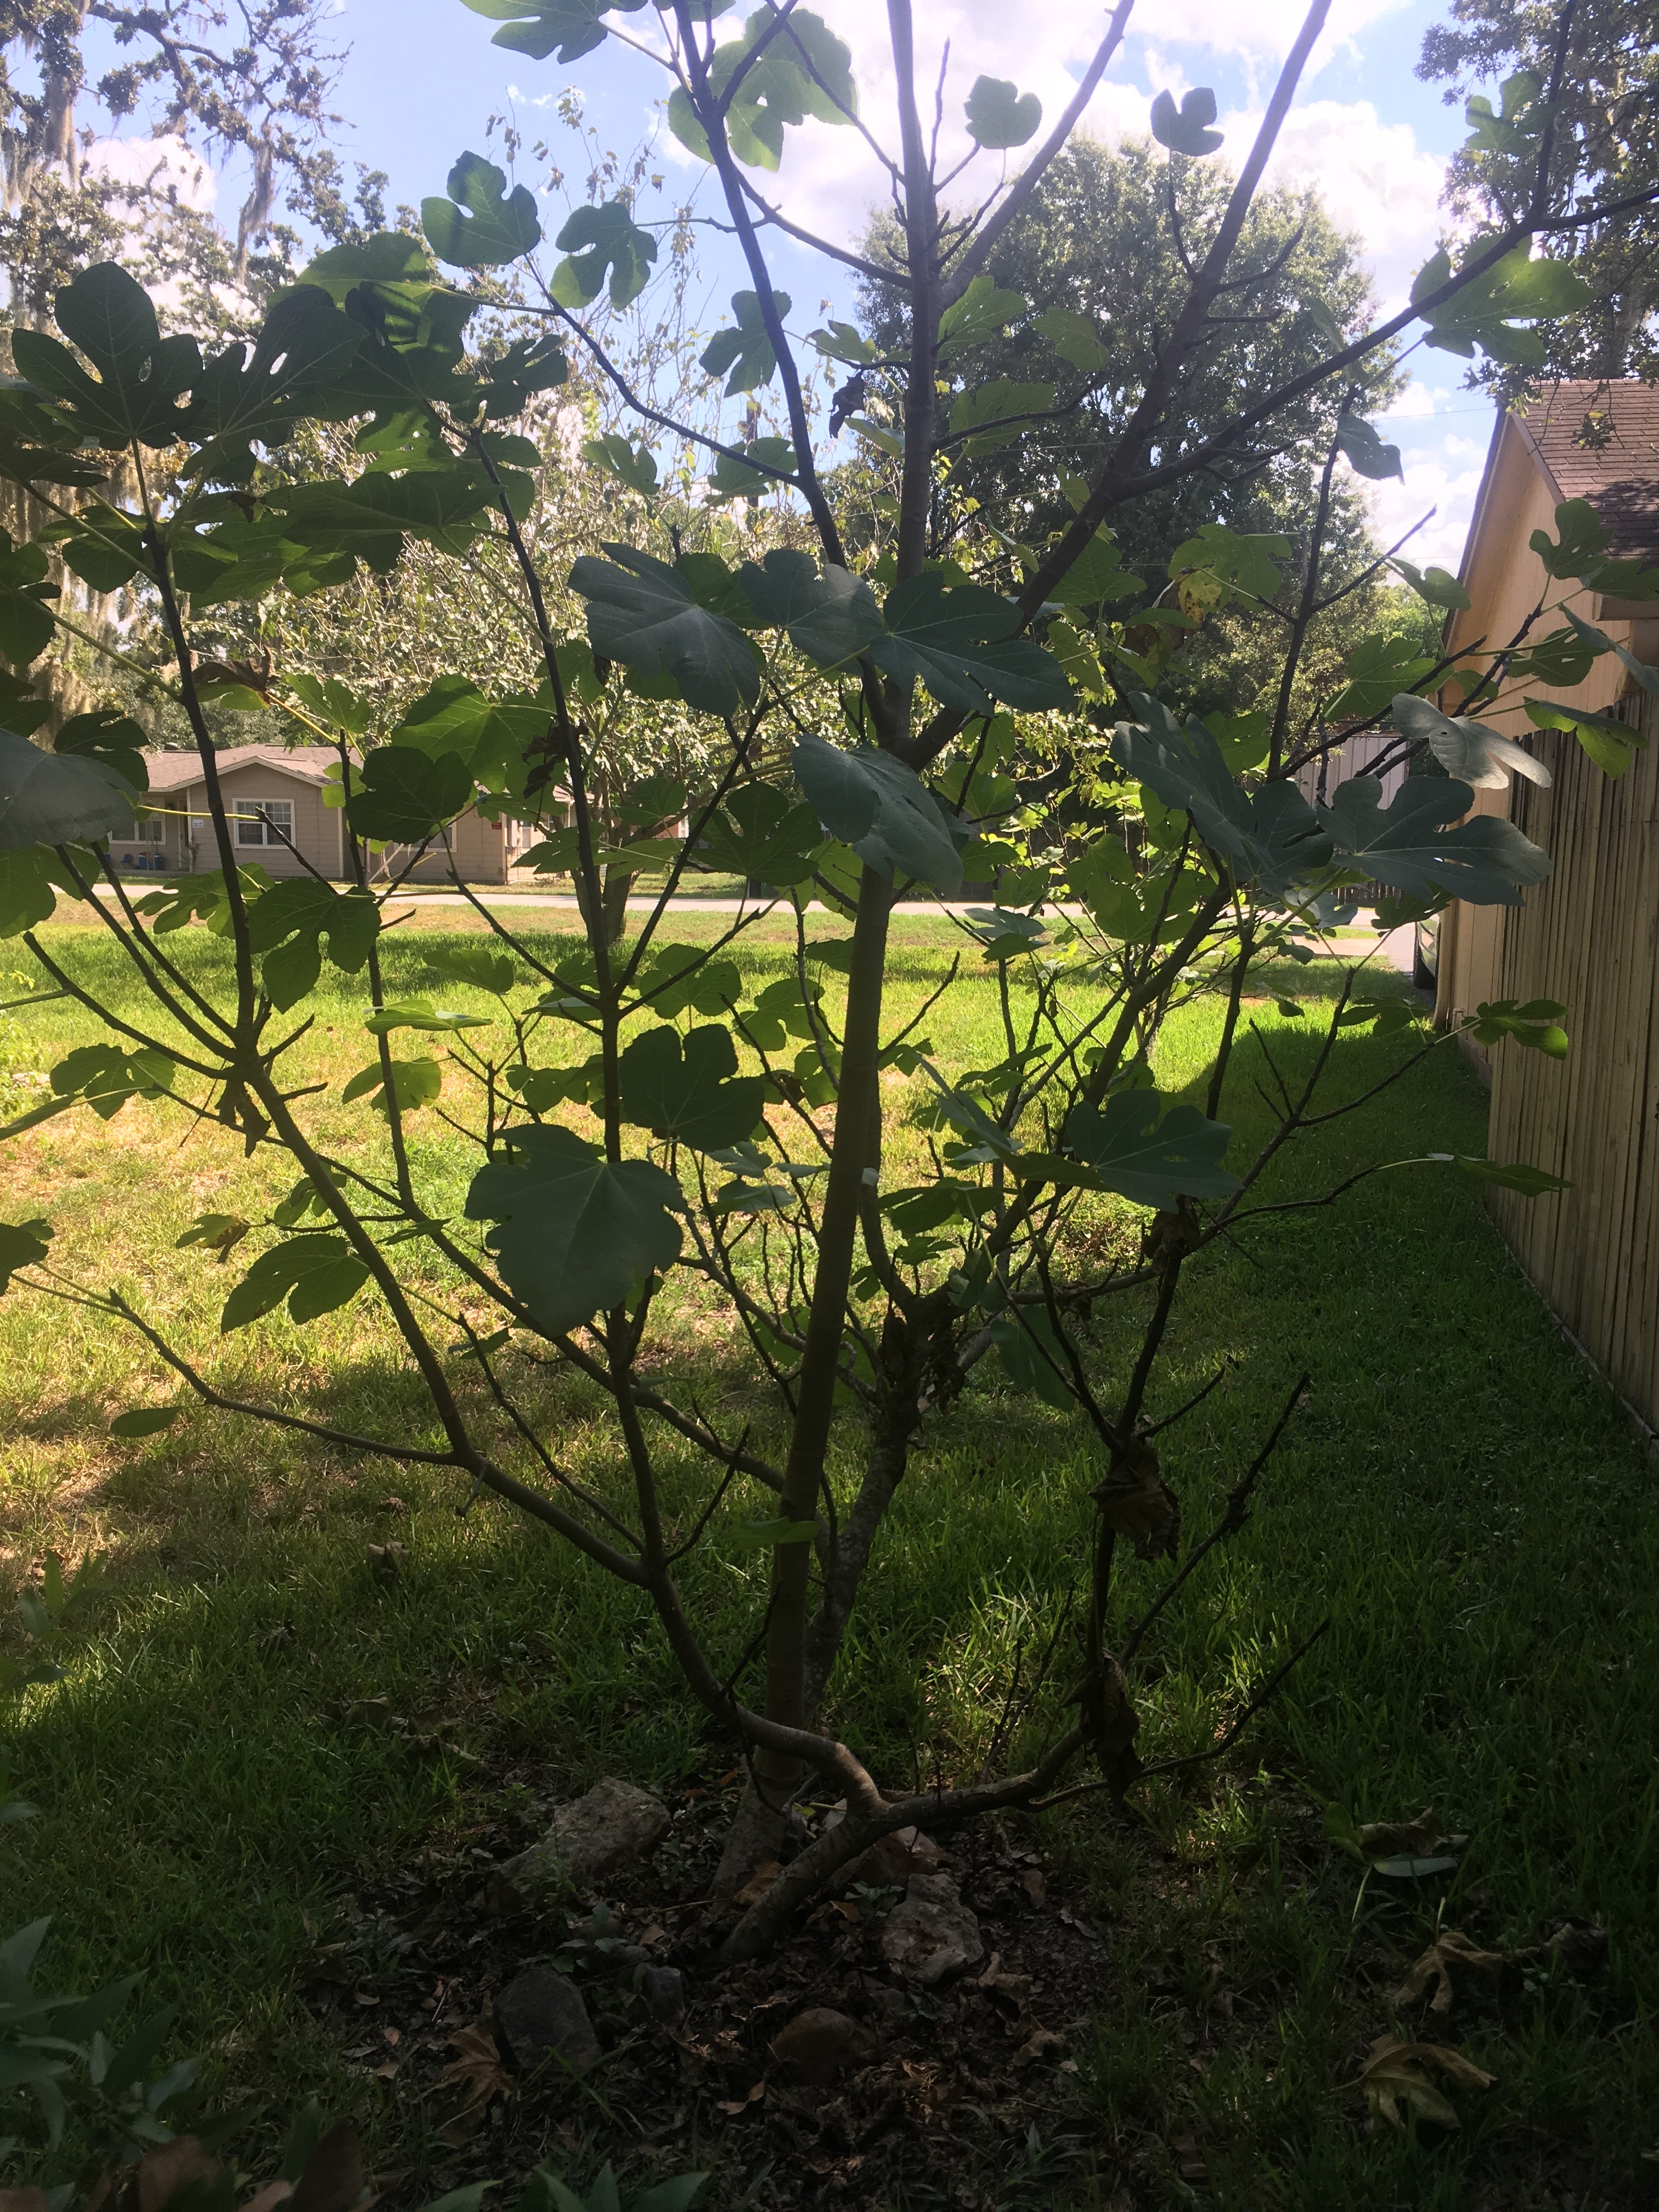 pic of fig tree at parent's house Sept 9th, 2019